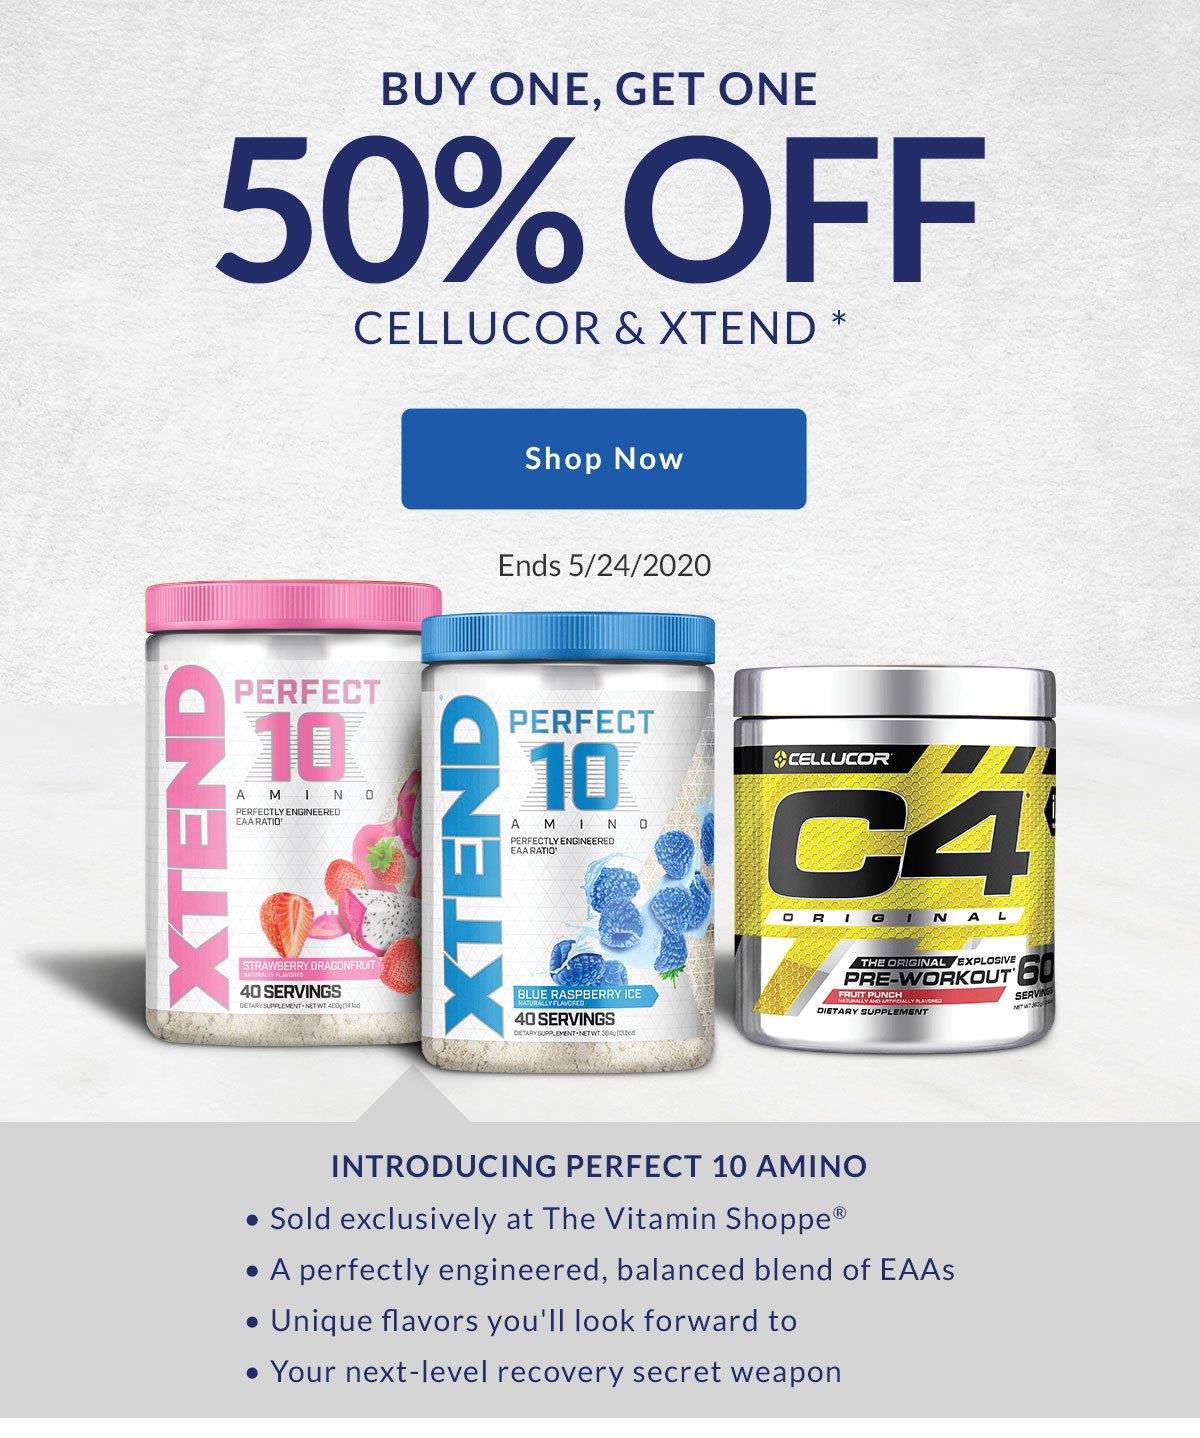 BUY ONE, GET ONE 50% OFF CELLUCOR & XTEND * | Shop Now | Ends 5/24/2020